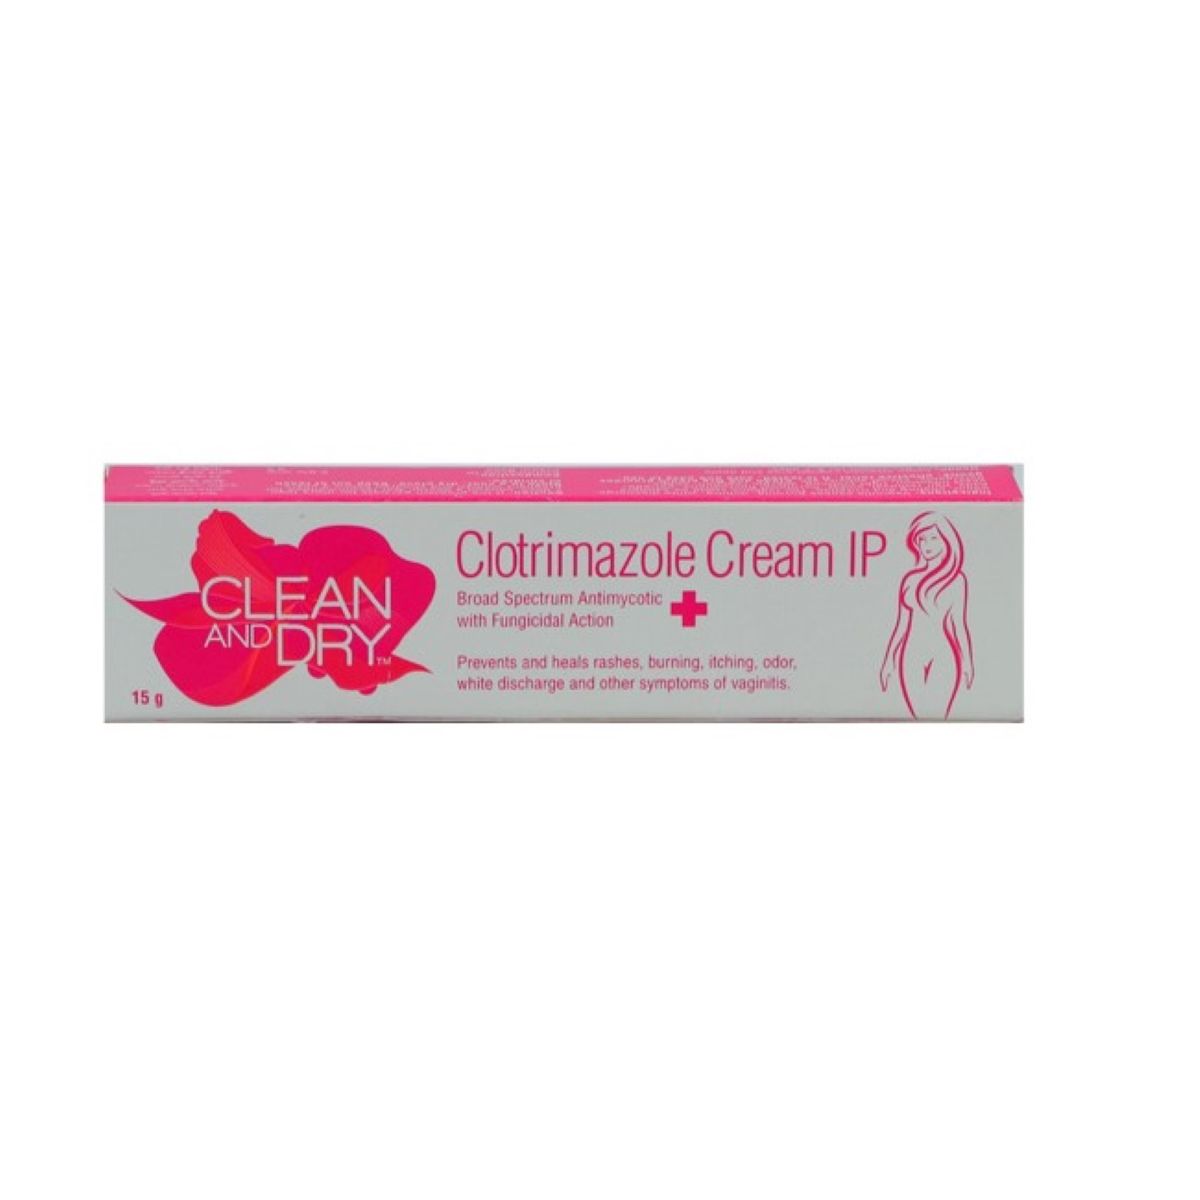 Clean And Dry Cream, 15 gm, Pack of 1 